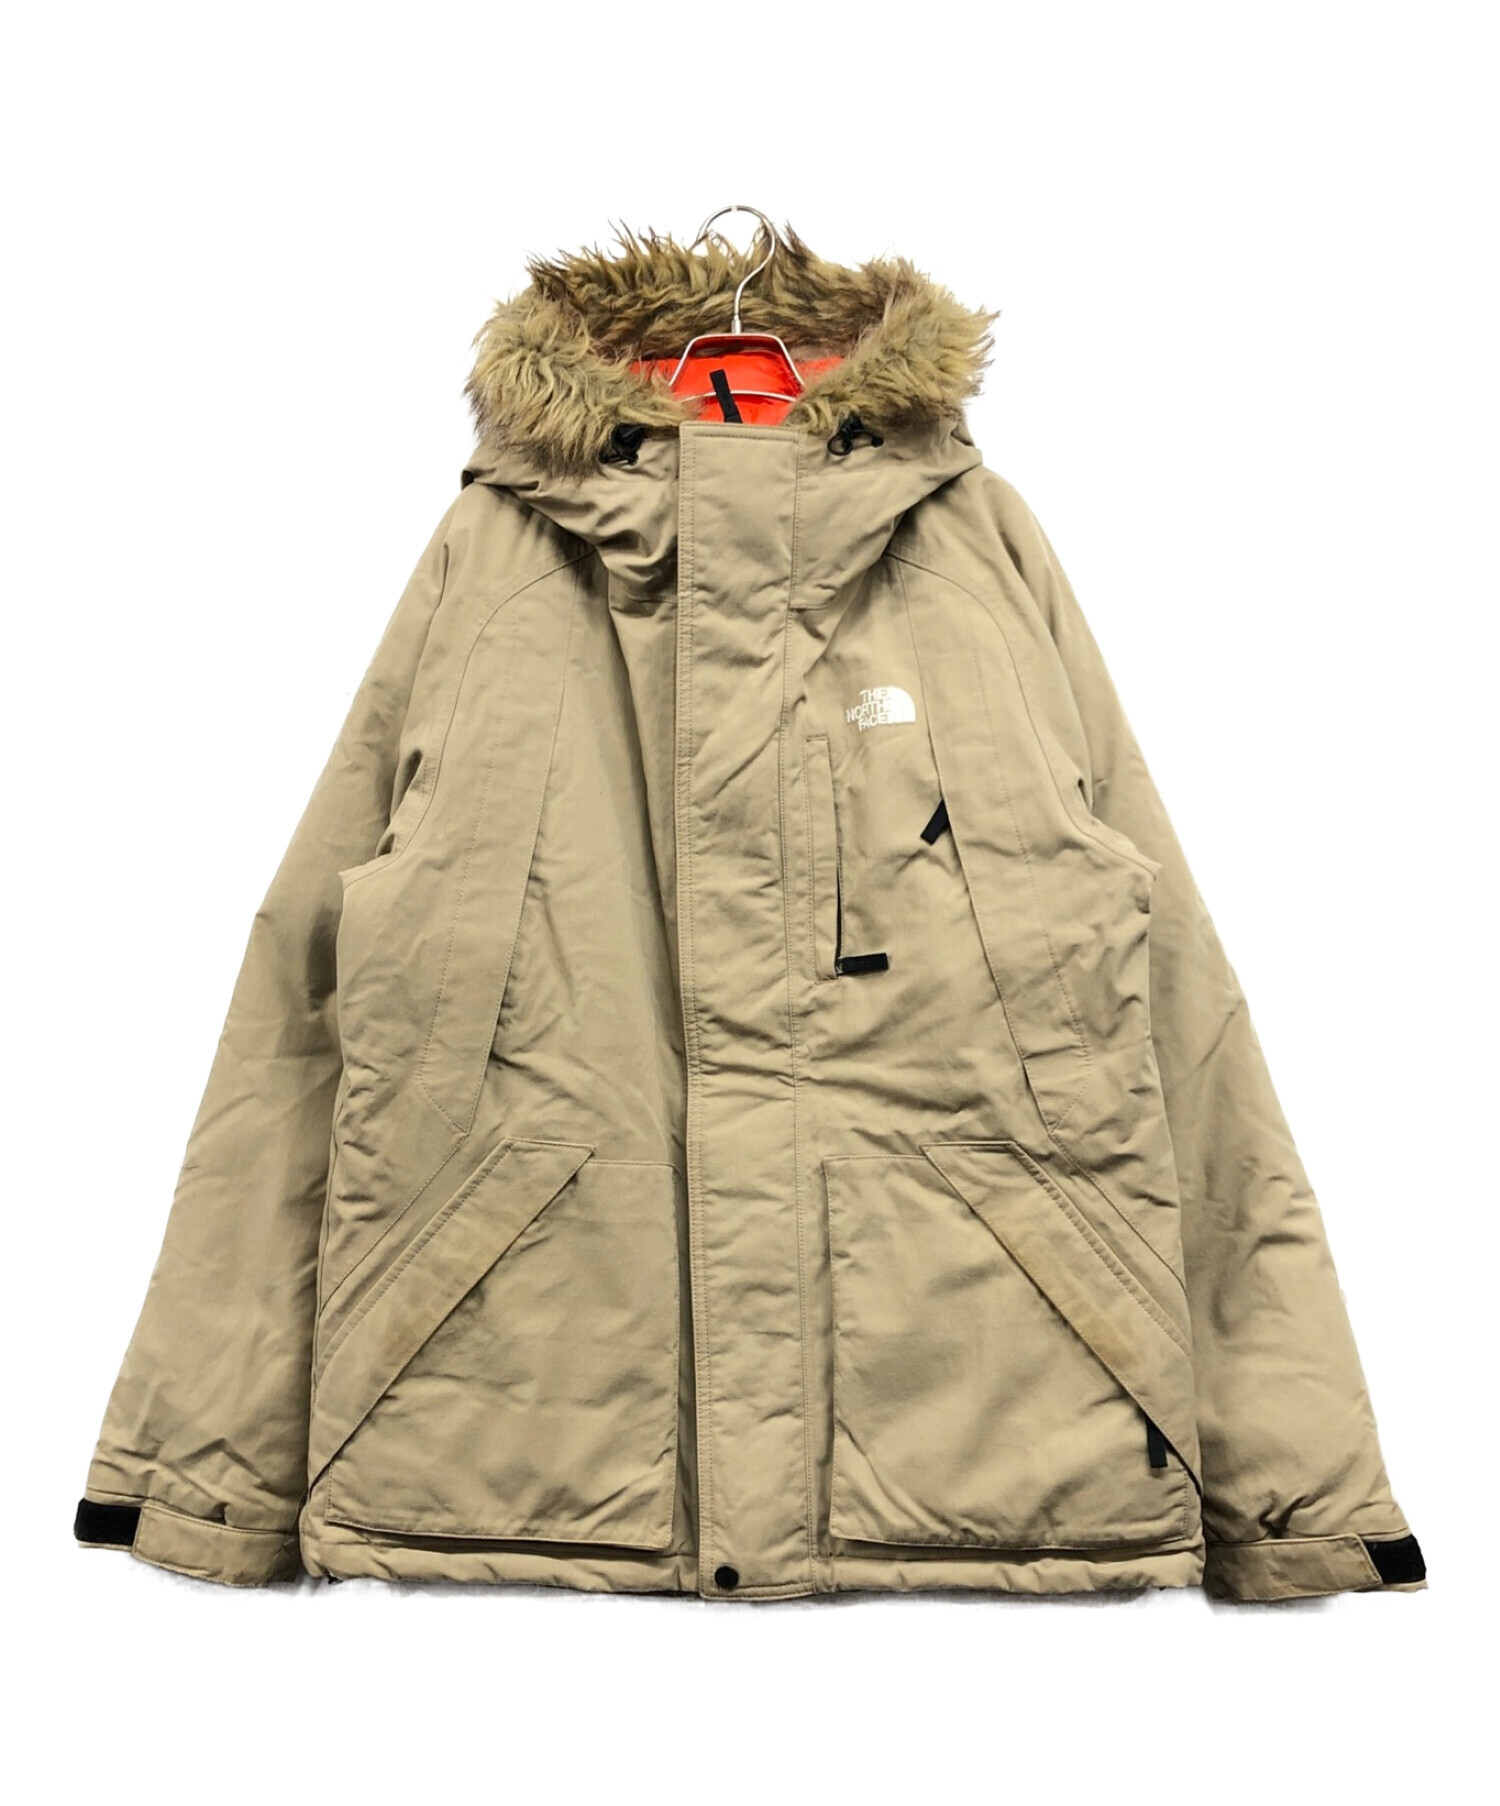 ND91311THE NORTH FACE ELEBUS JACKET